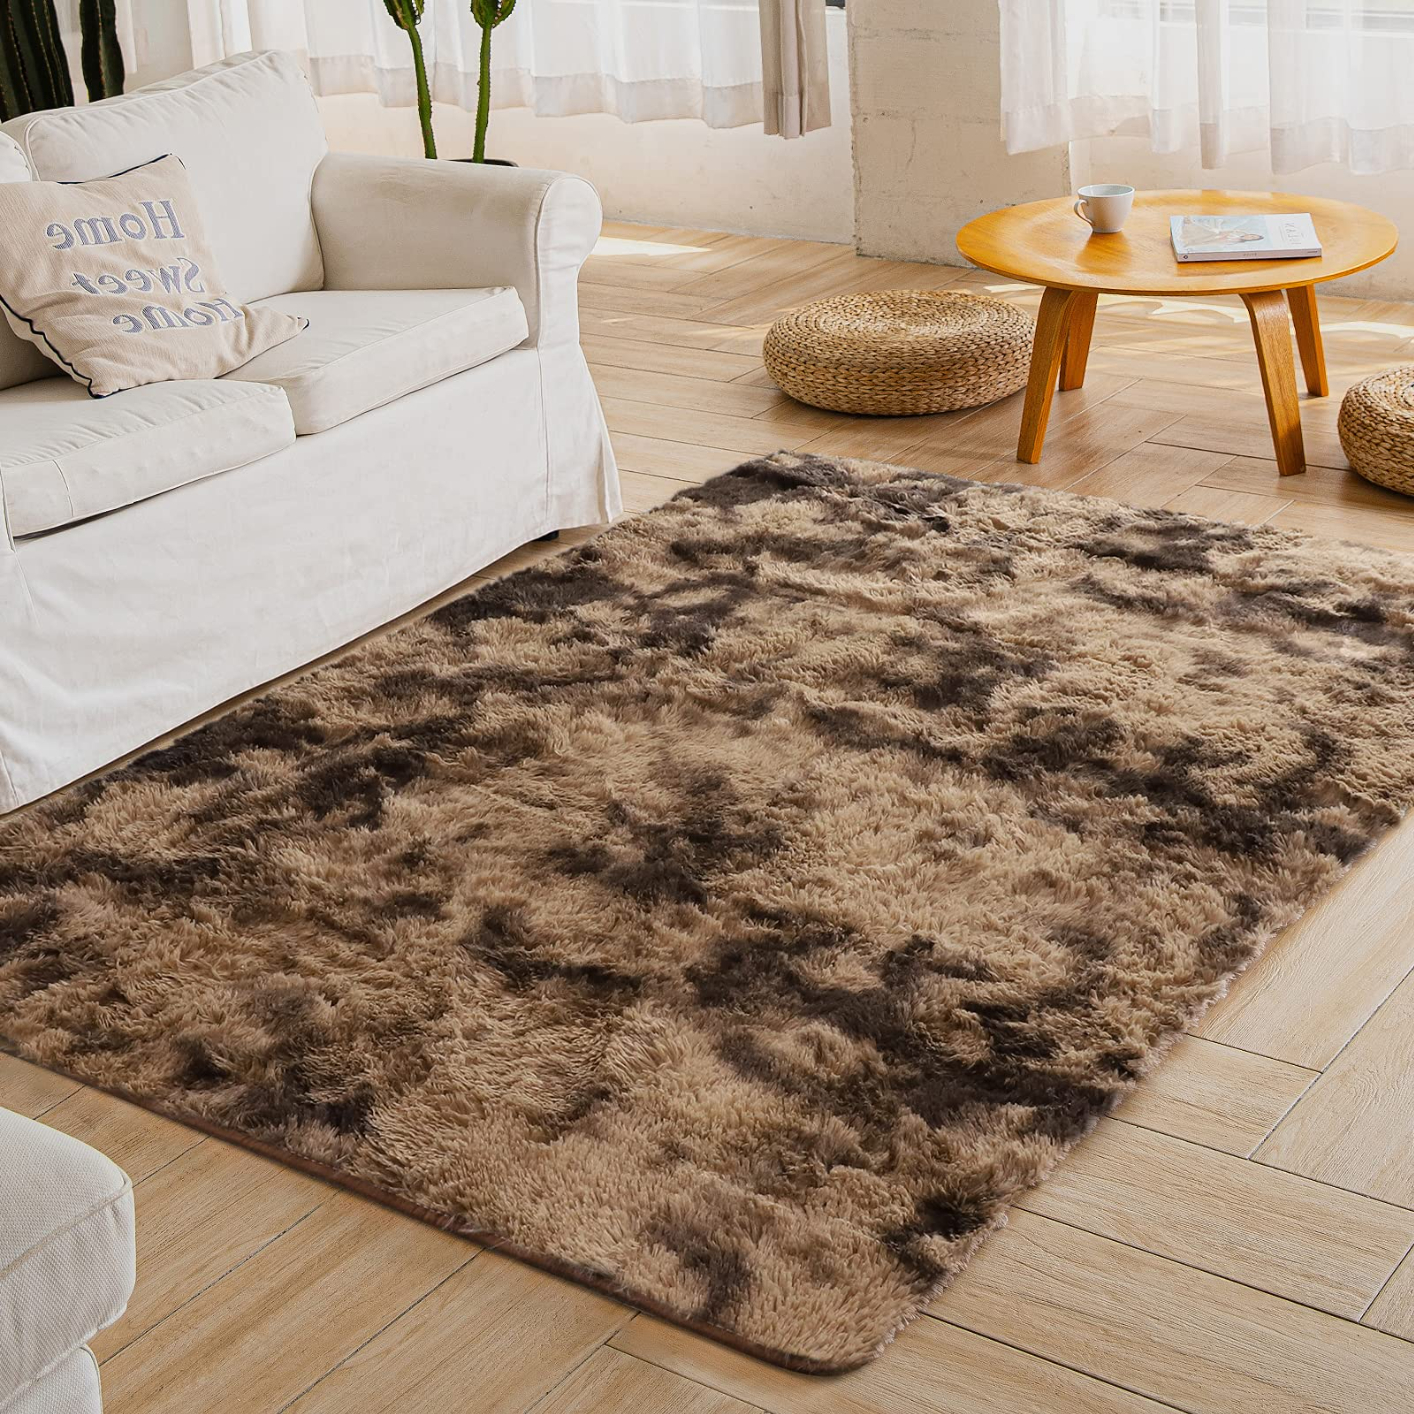 Tie Dye Area Rug for Bedroom Living Room Fluffy Shaggy Gradient Faux Fur Carpet for Kids Adults Fuzzy Plush Home Decor Floor Mat